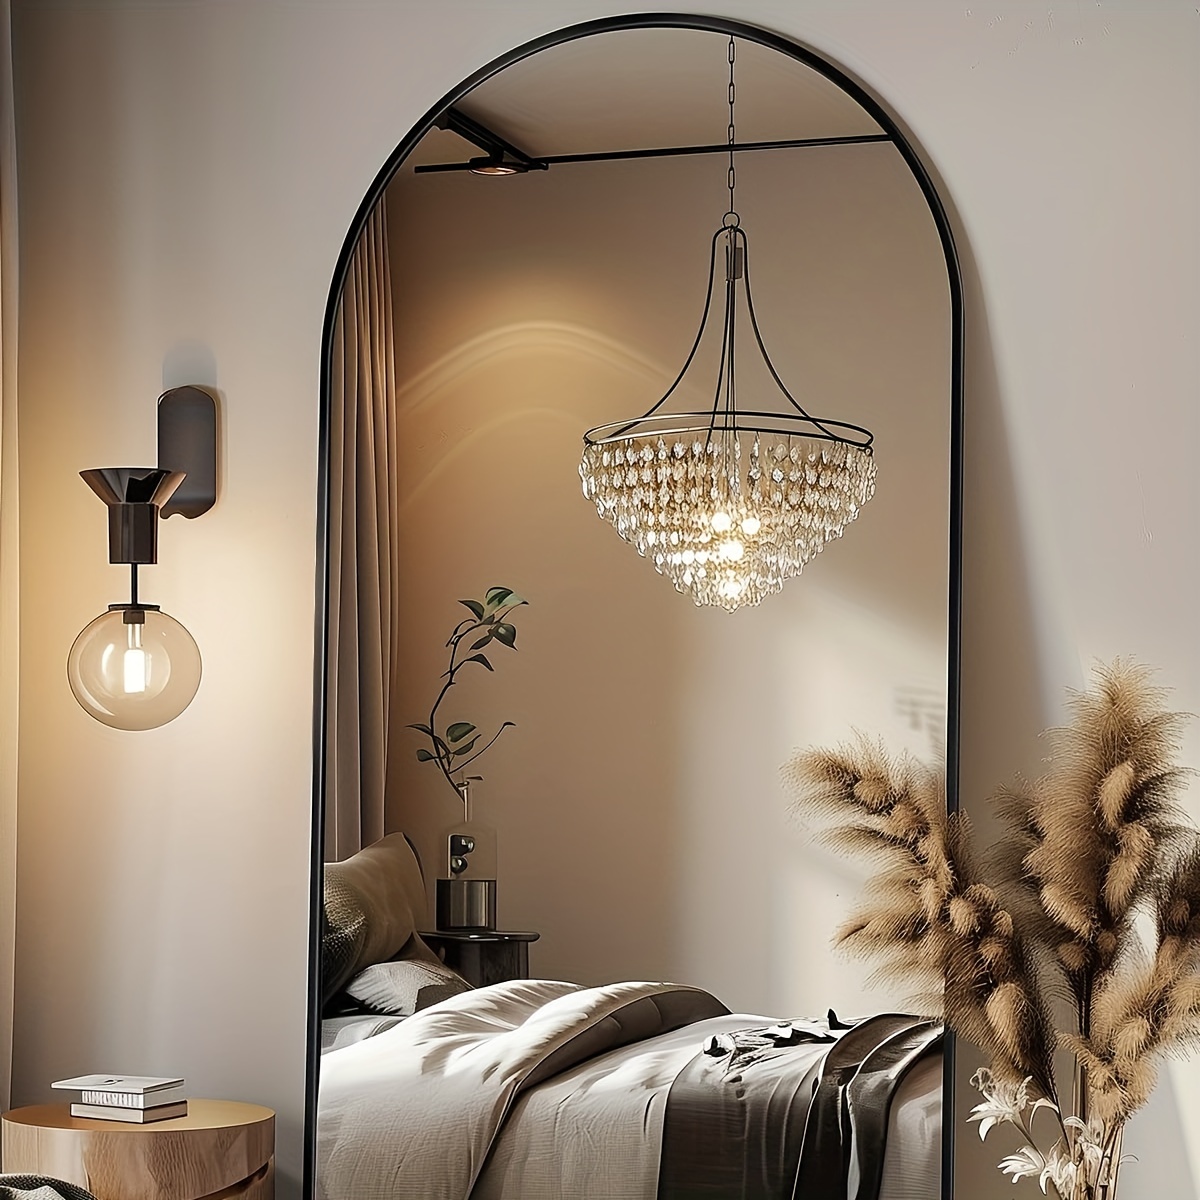 

26" X 71" Arched Full Length Mirror - Black Full Body Mirror - Extra Large For Bedroom, Living Room, Bathroom